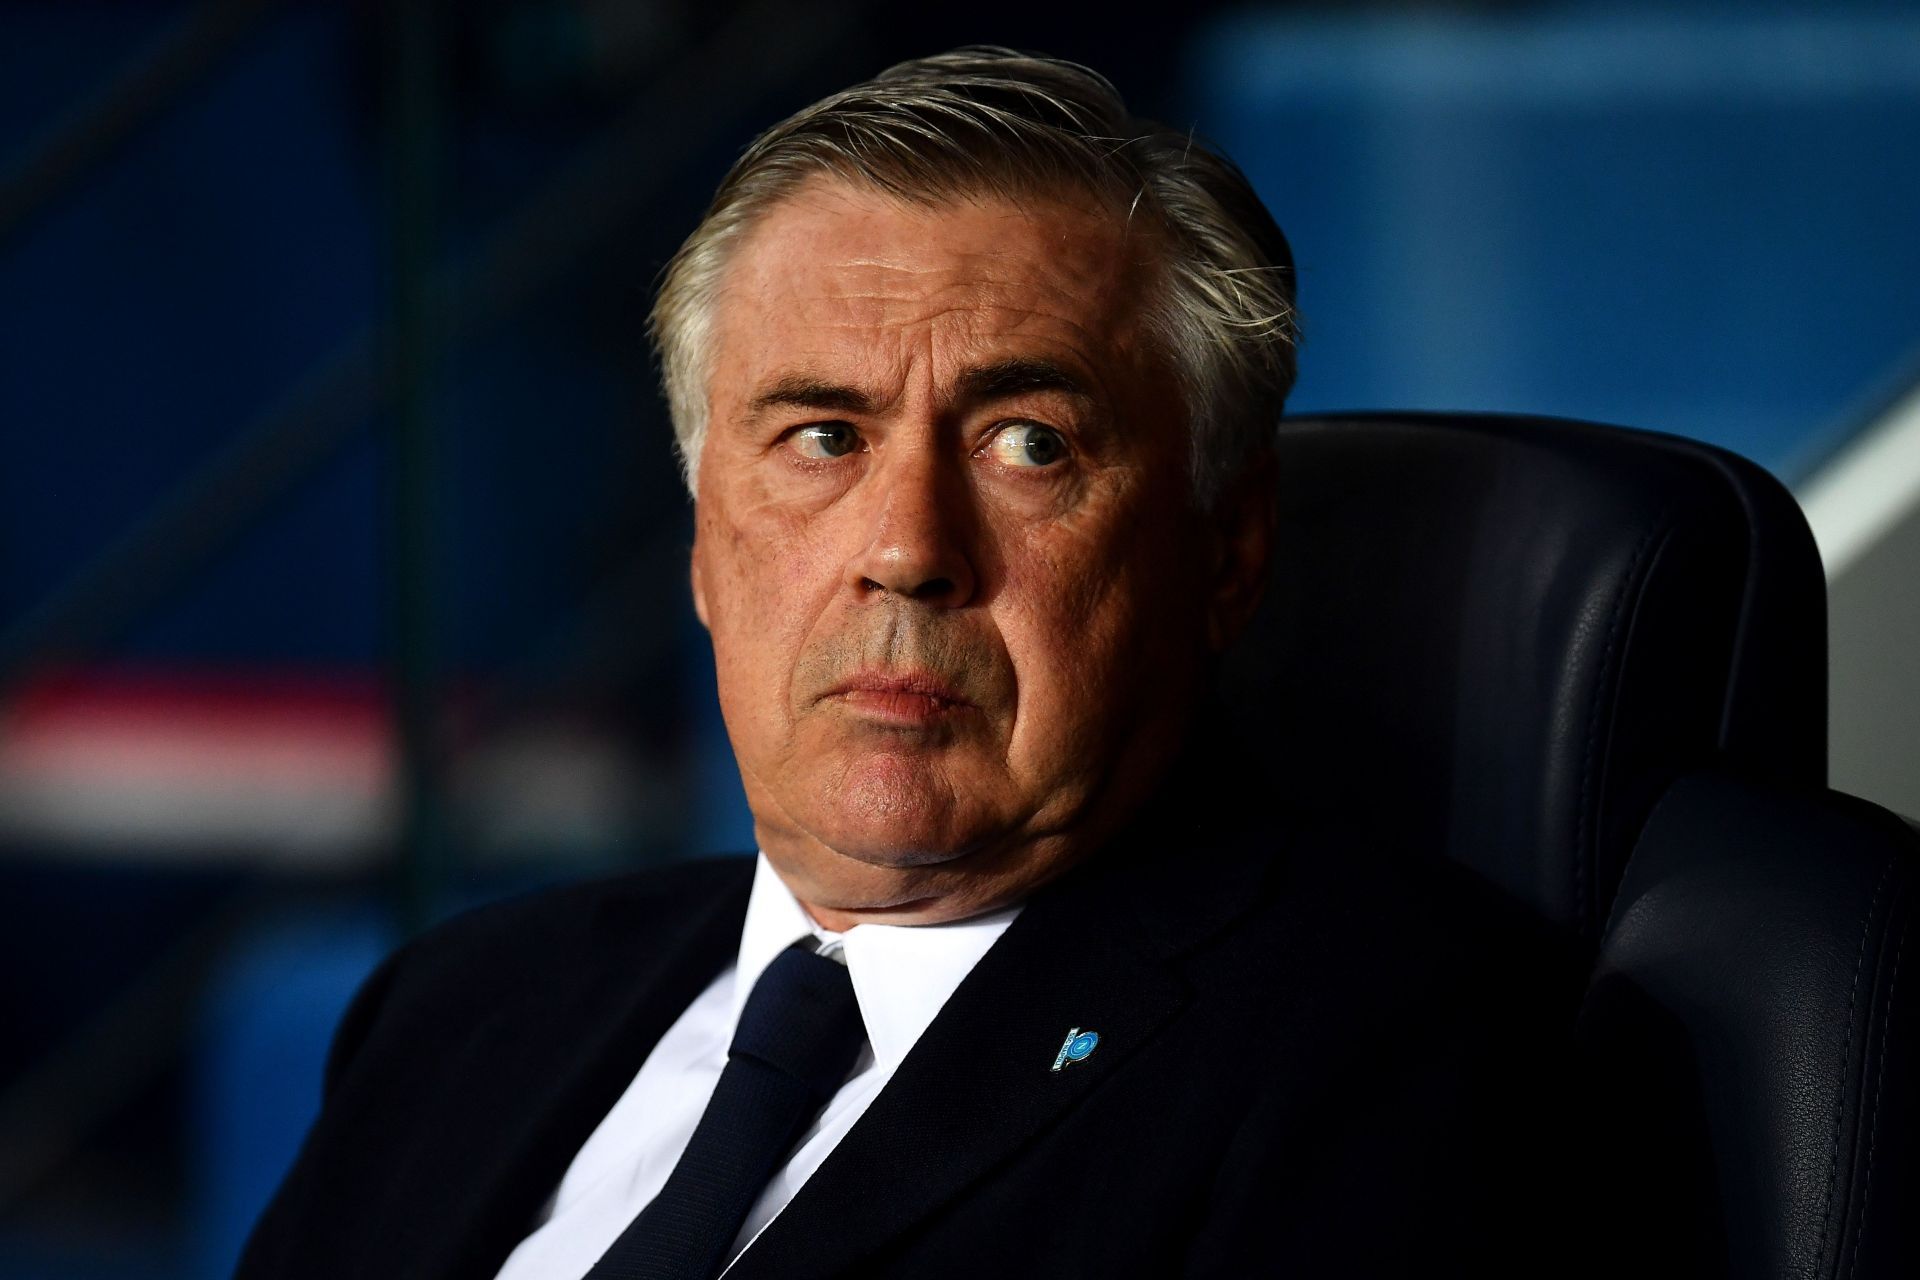 Carlo Ancelotti is the current manager of Real Madrid